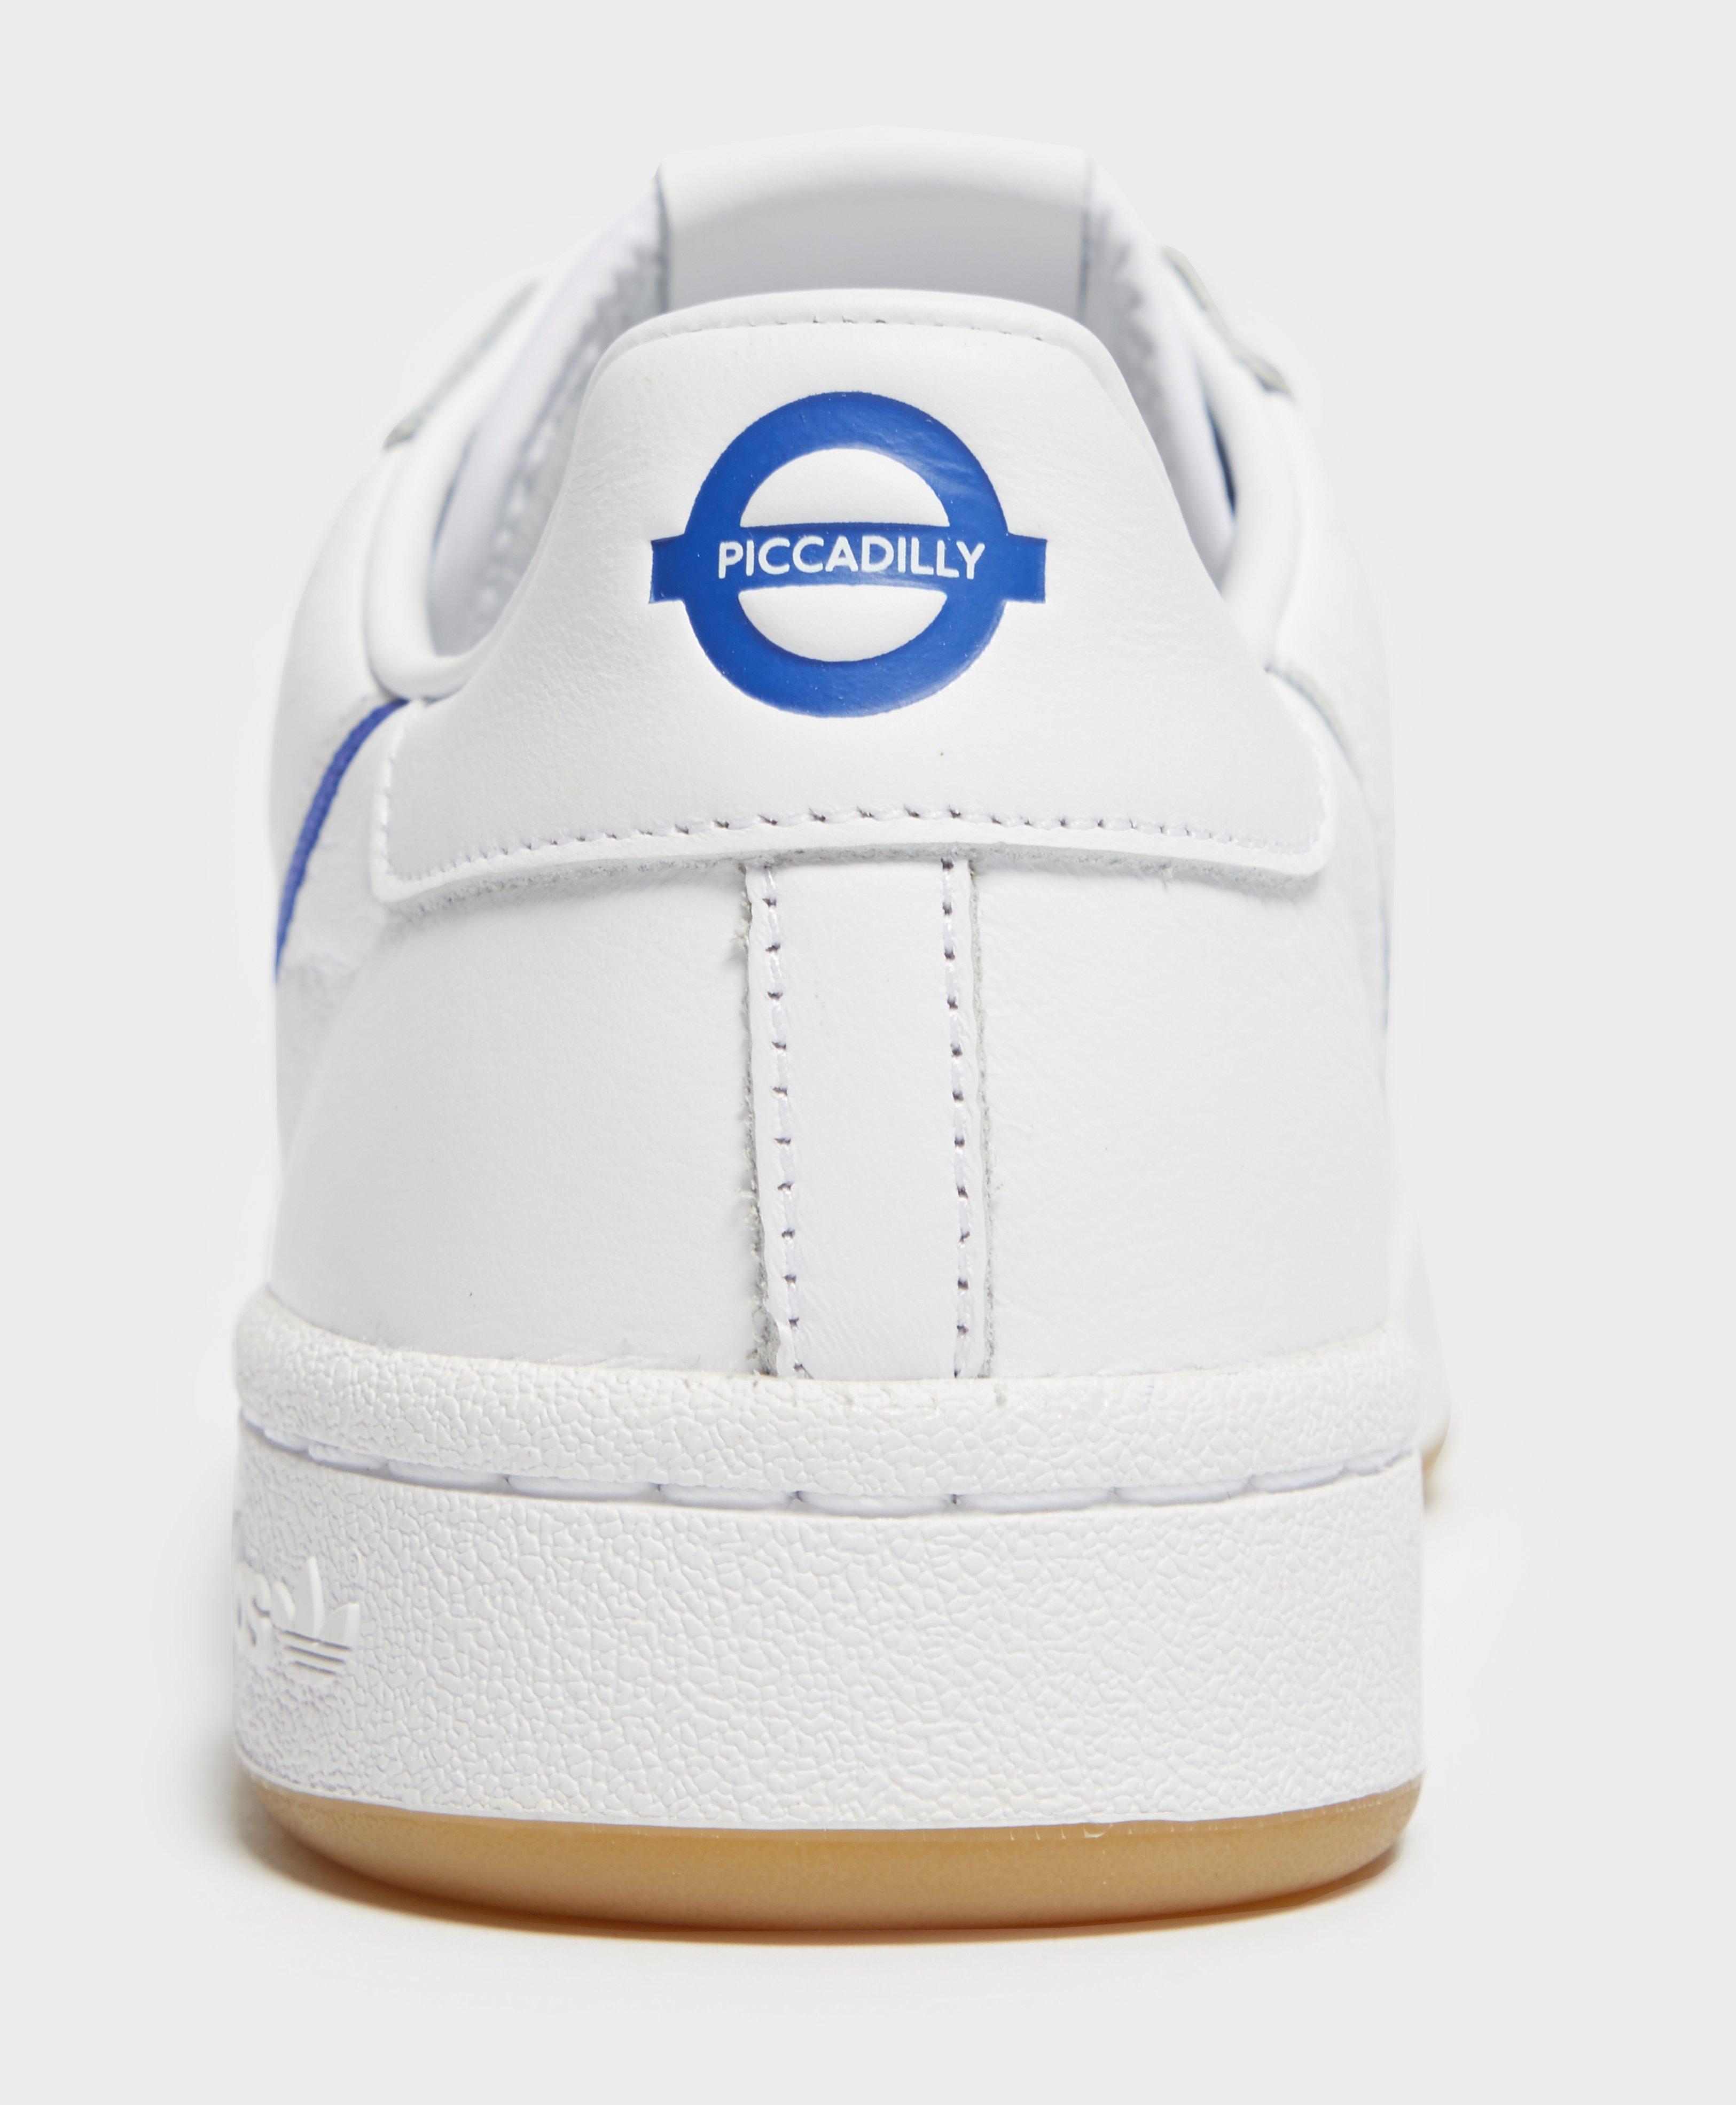 adidas piccadilly line